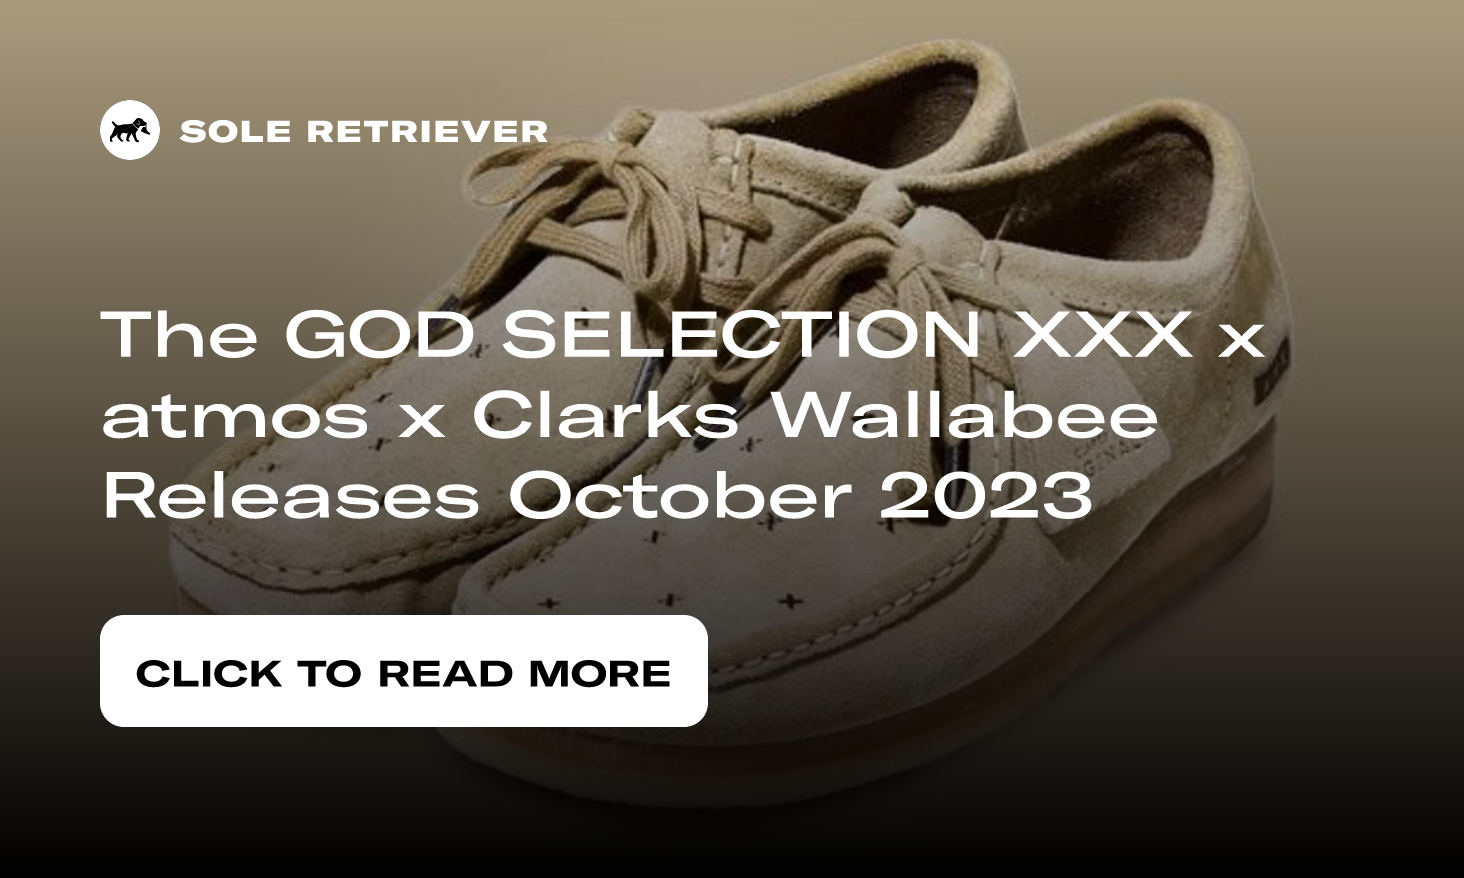 The GOD SELECTION XXX x atmos x Clarks Wallabee Releases October 2023